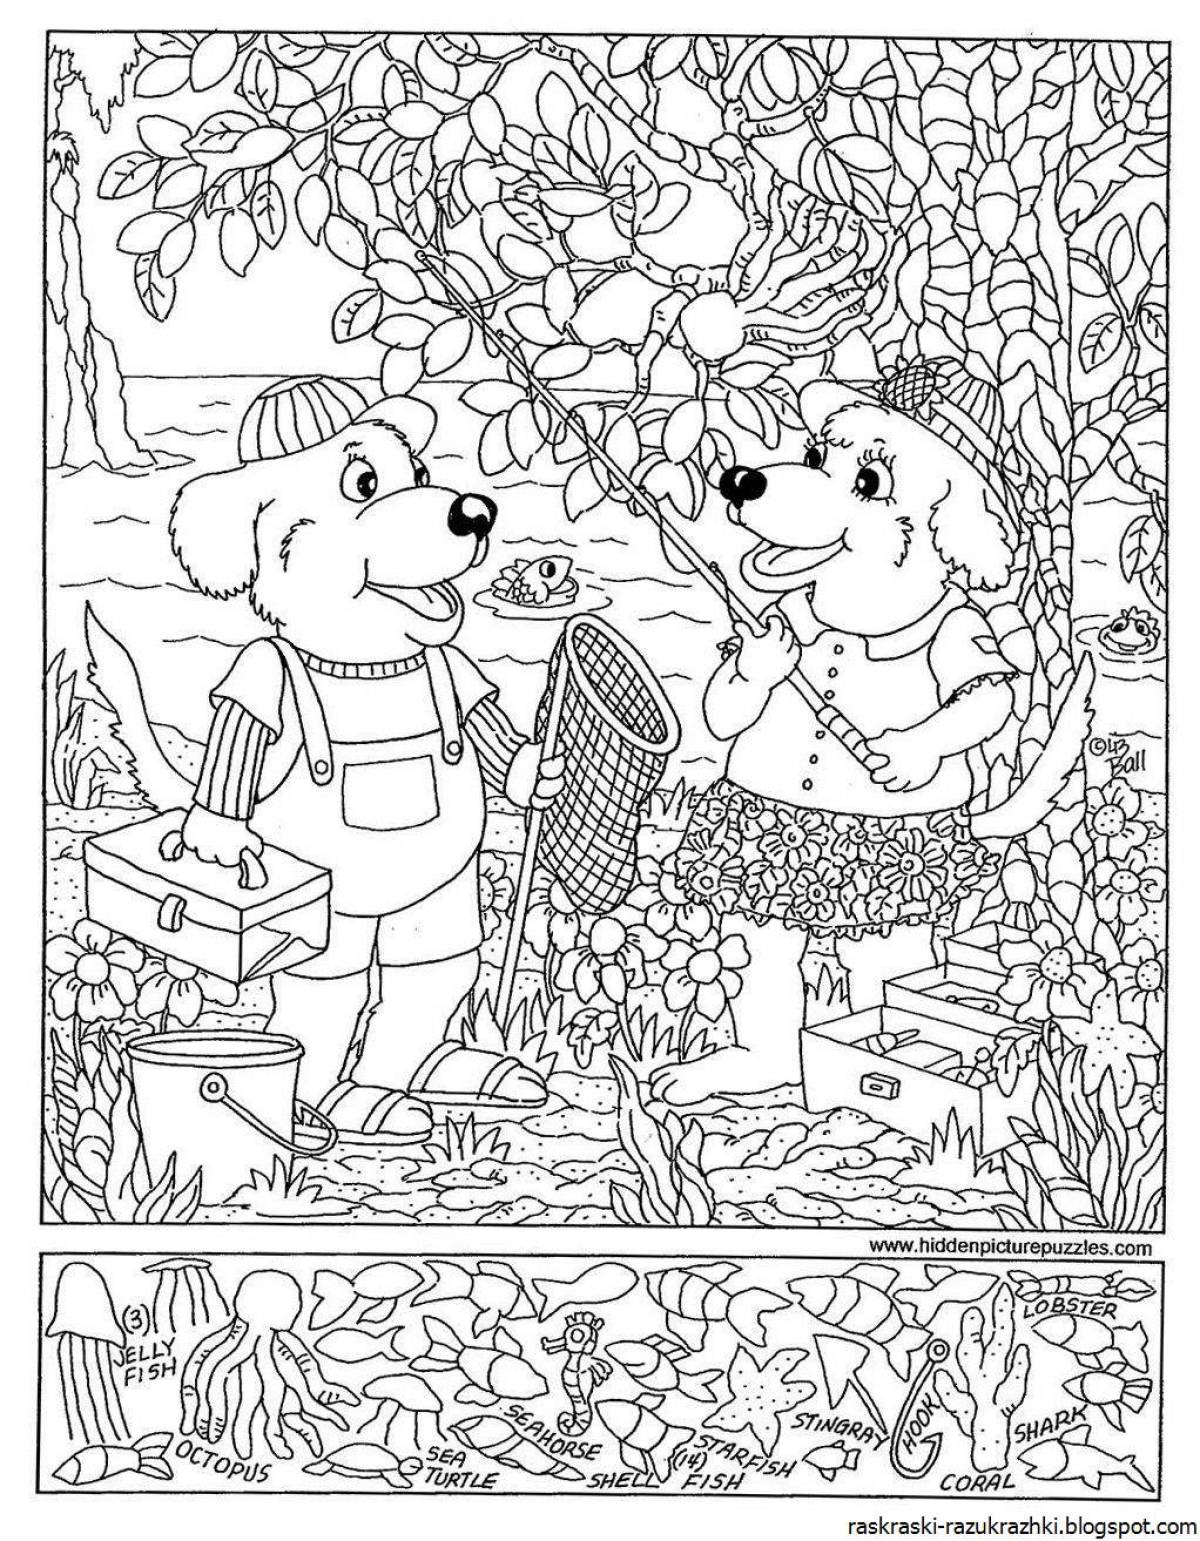 Coloring book for smart